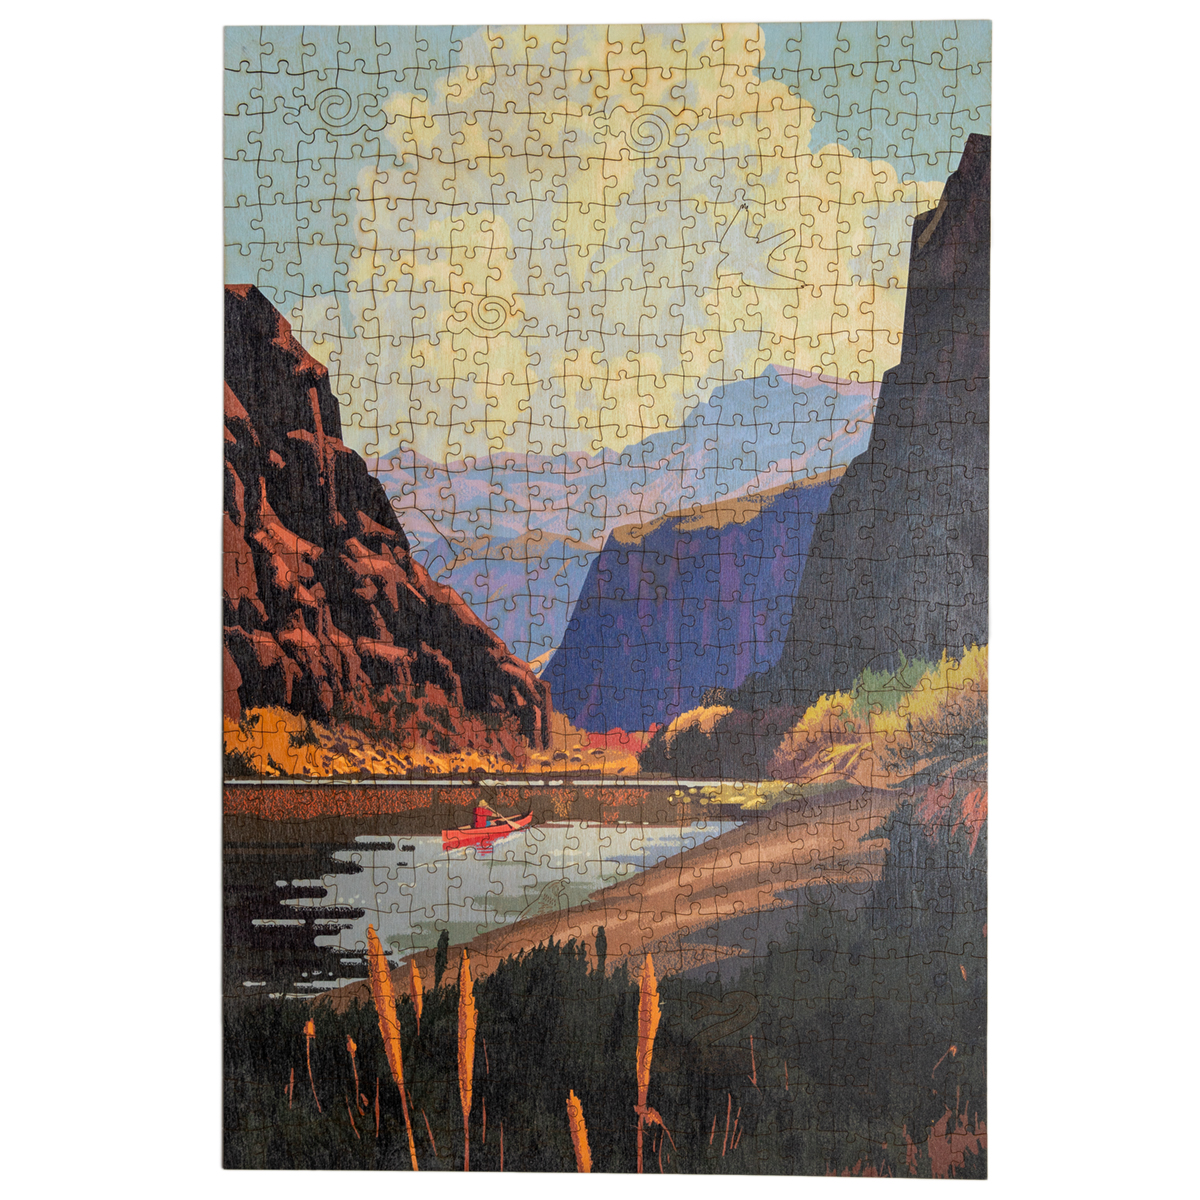 Big Bend Ranch State Park Wooden Puzzle